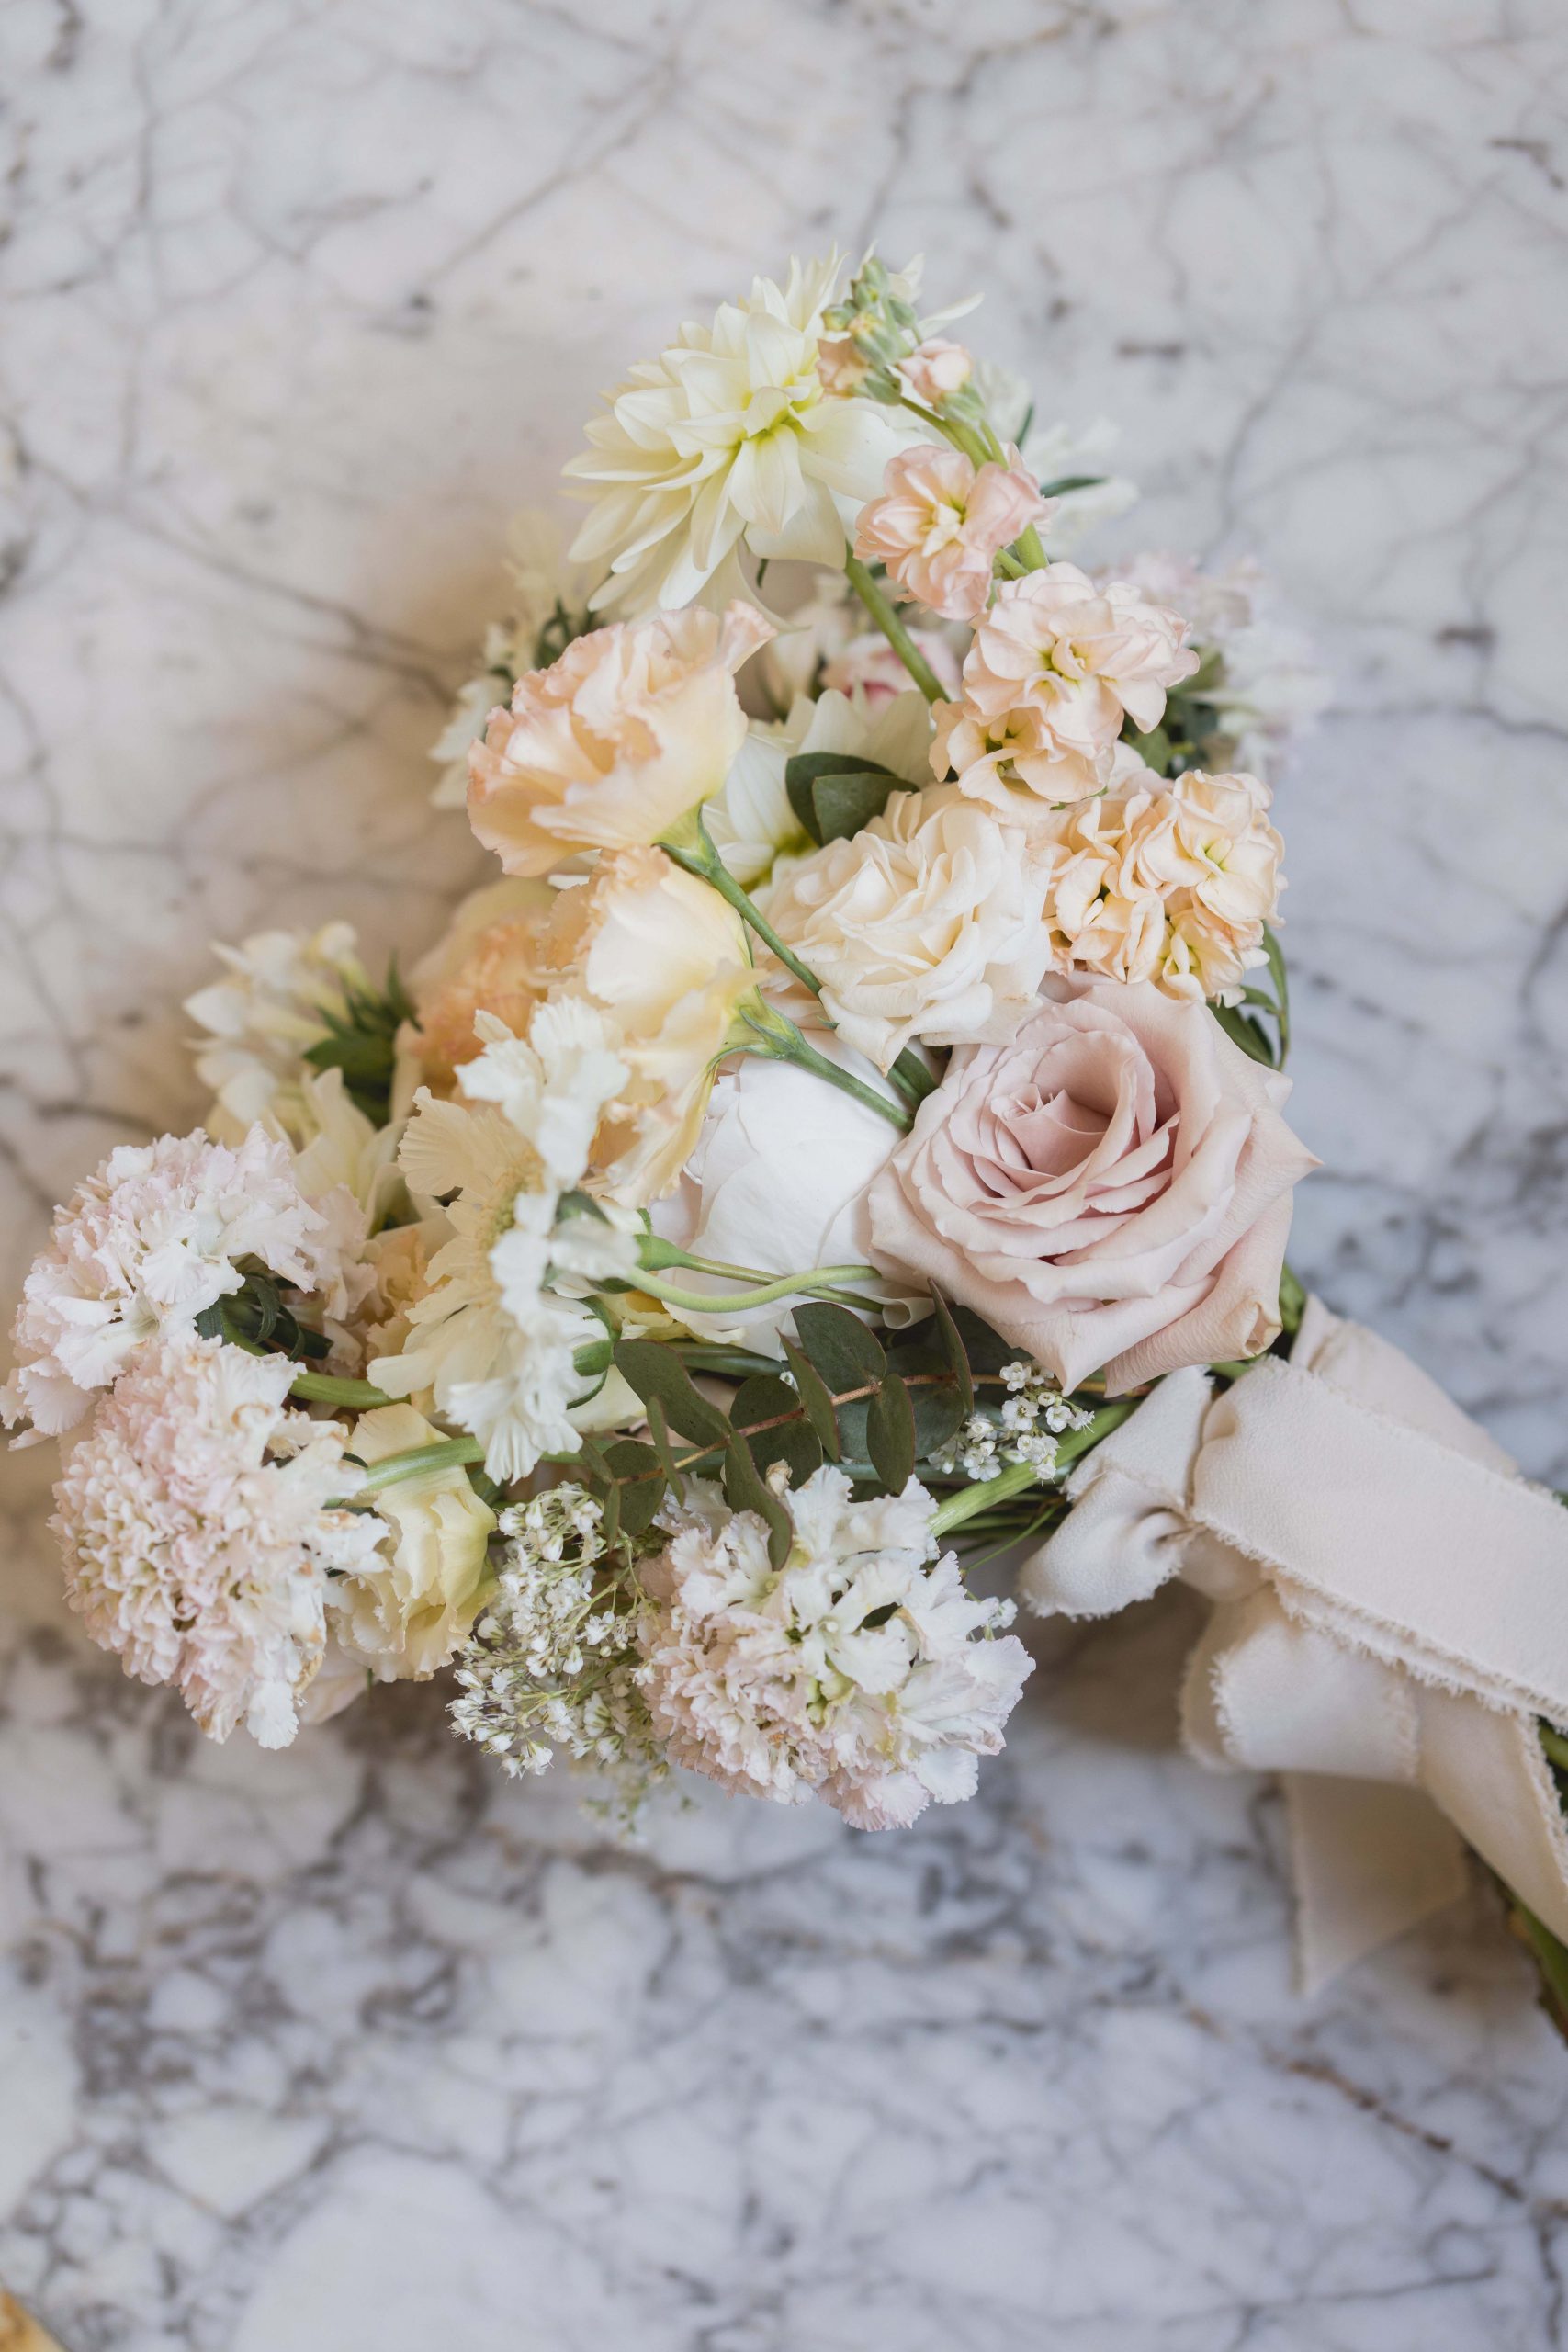 Romantic heart-shaped bouquet with flowers in shades of pink and pale peach